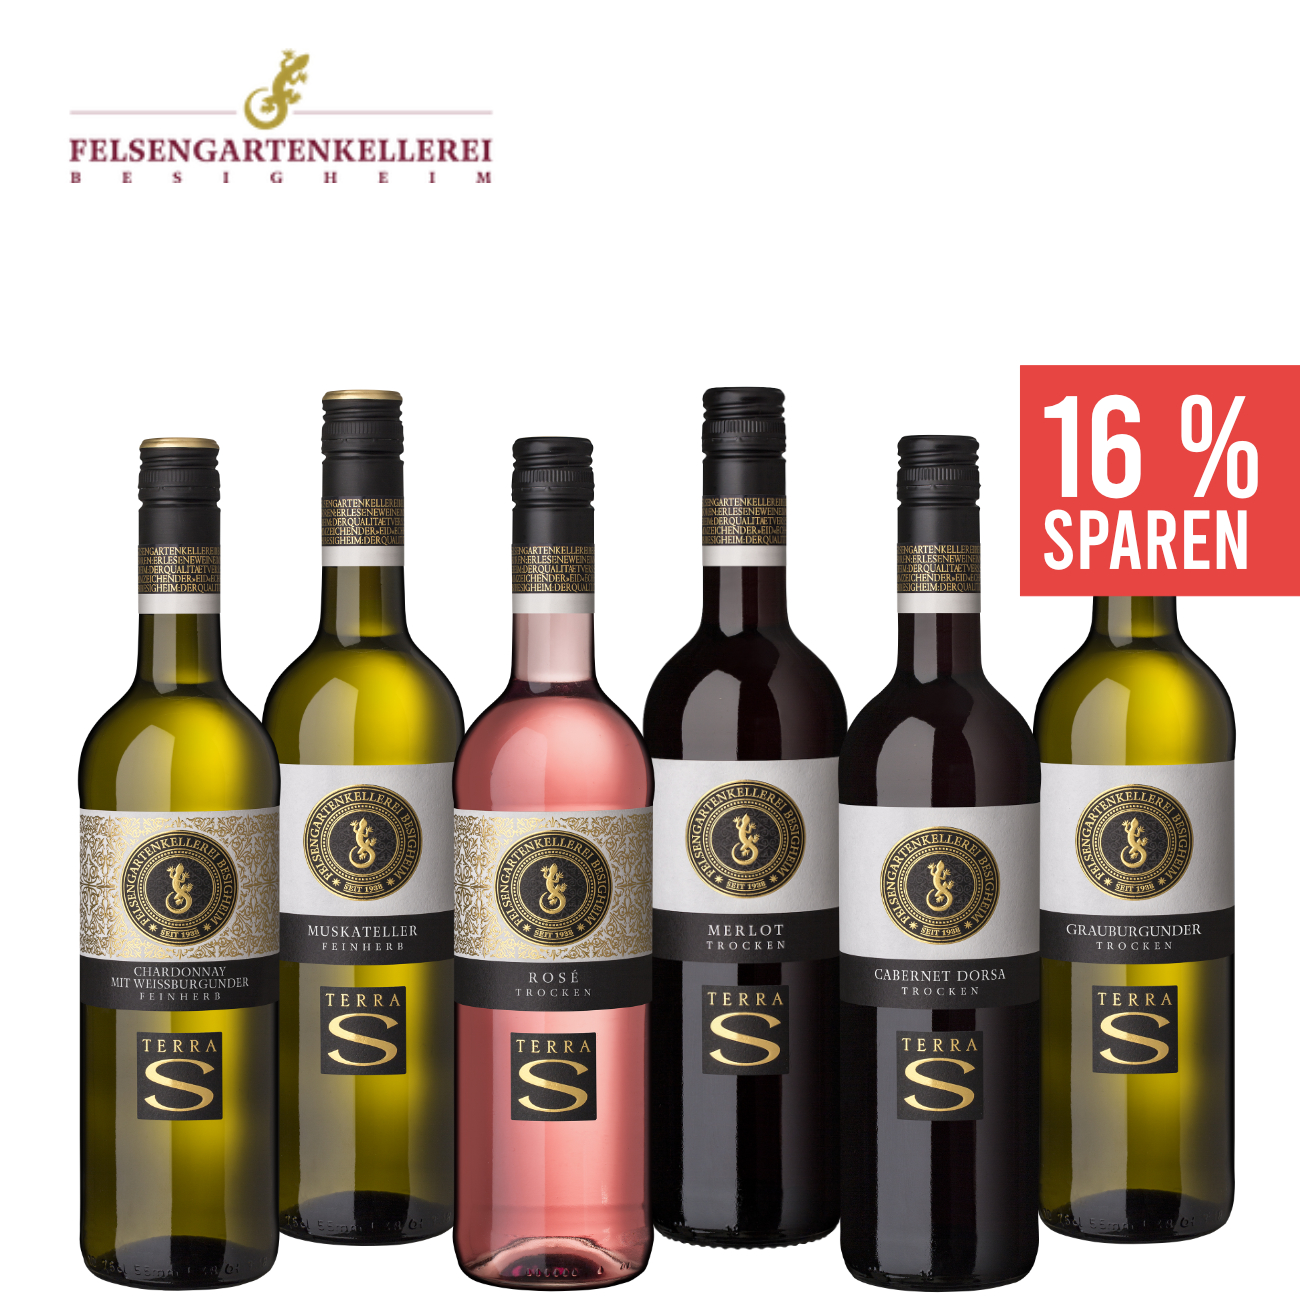 wein.plus Find+Buy: The wines Find+Buy our wein.plus | members of